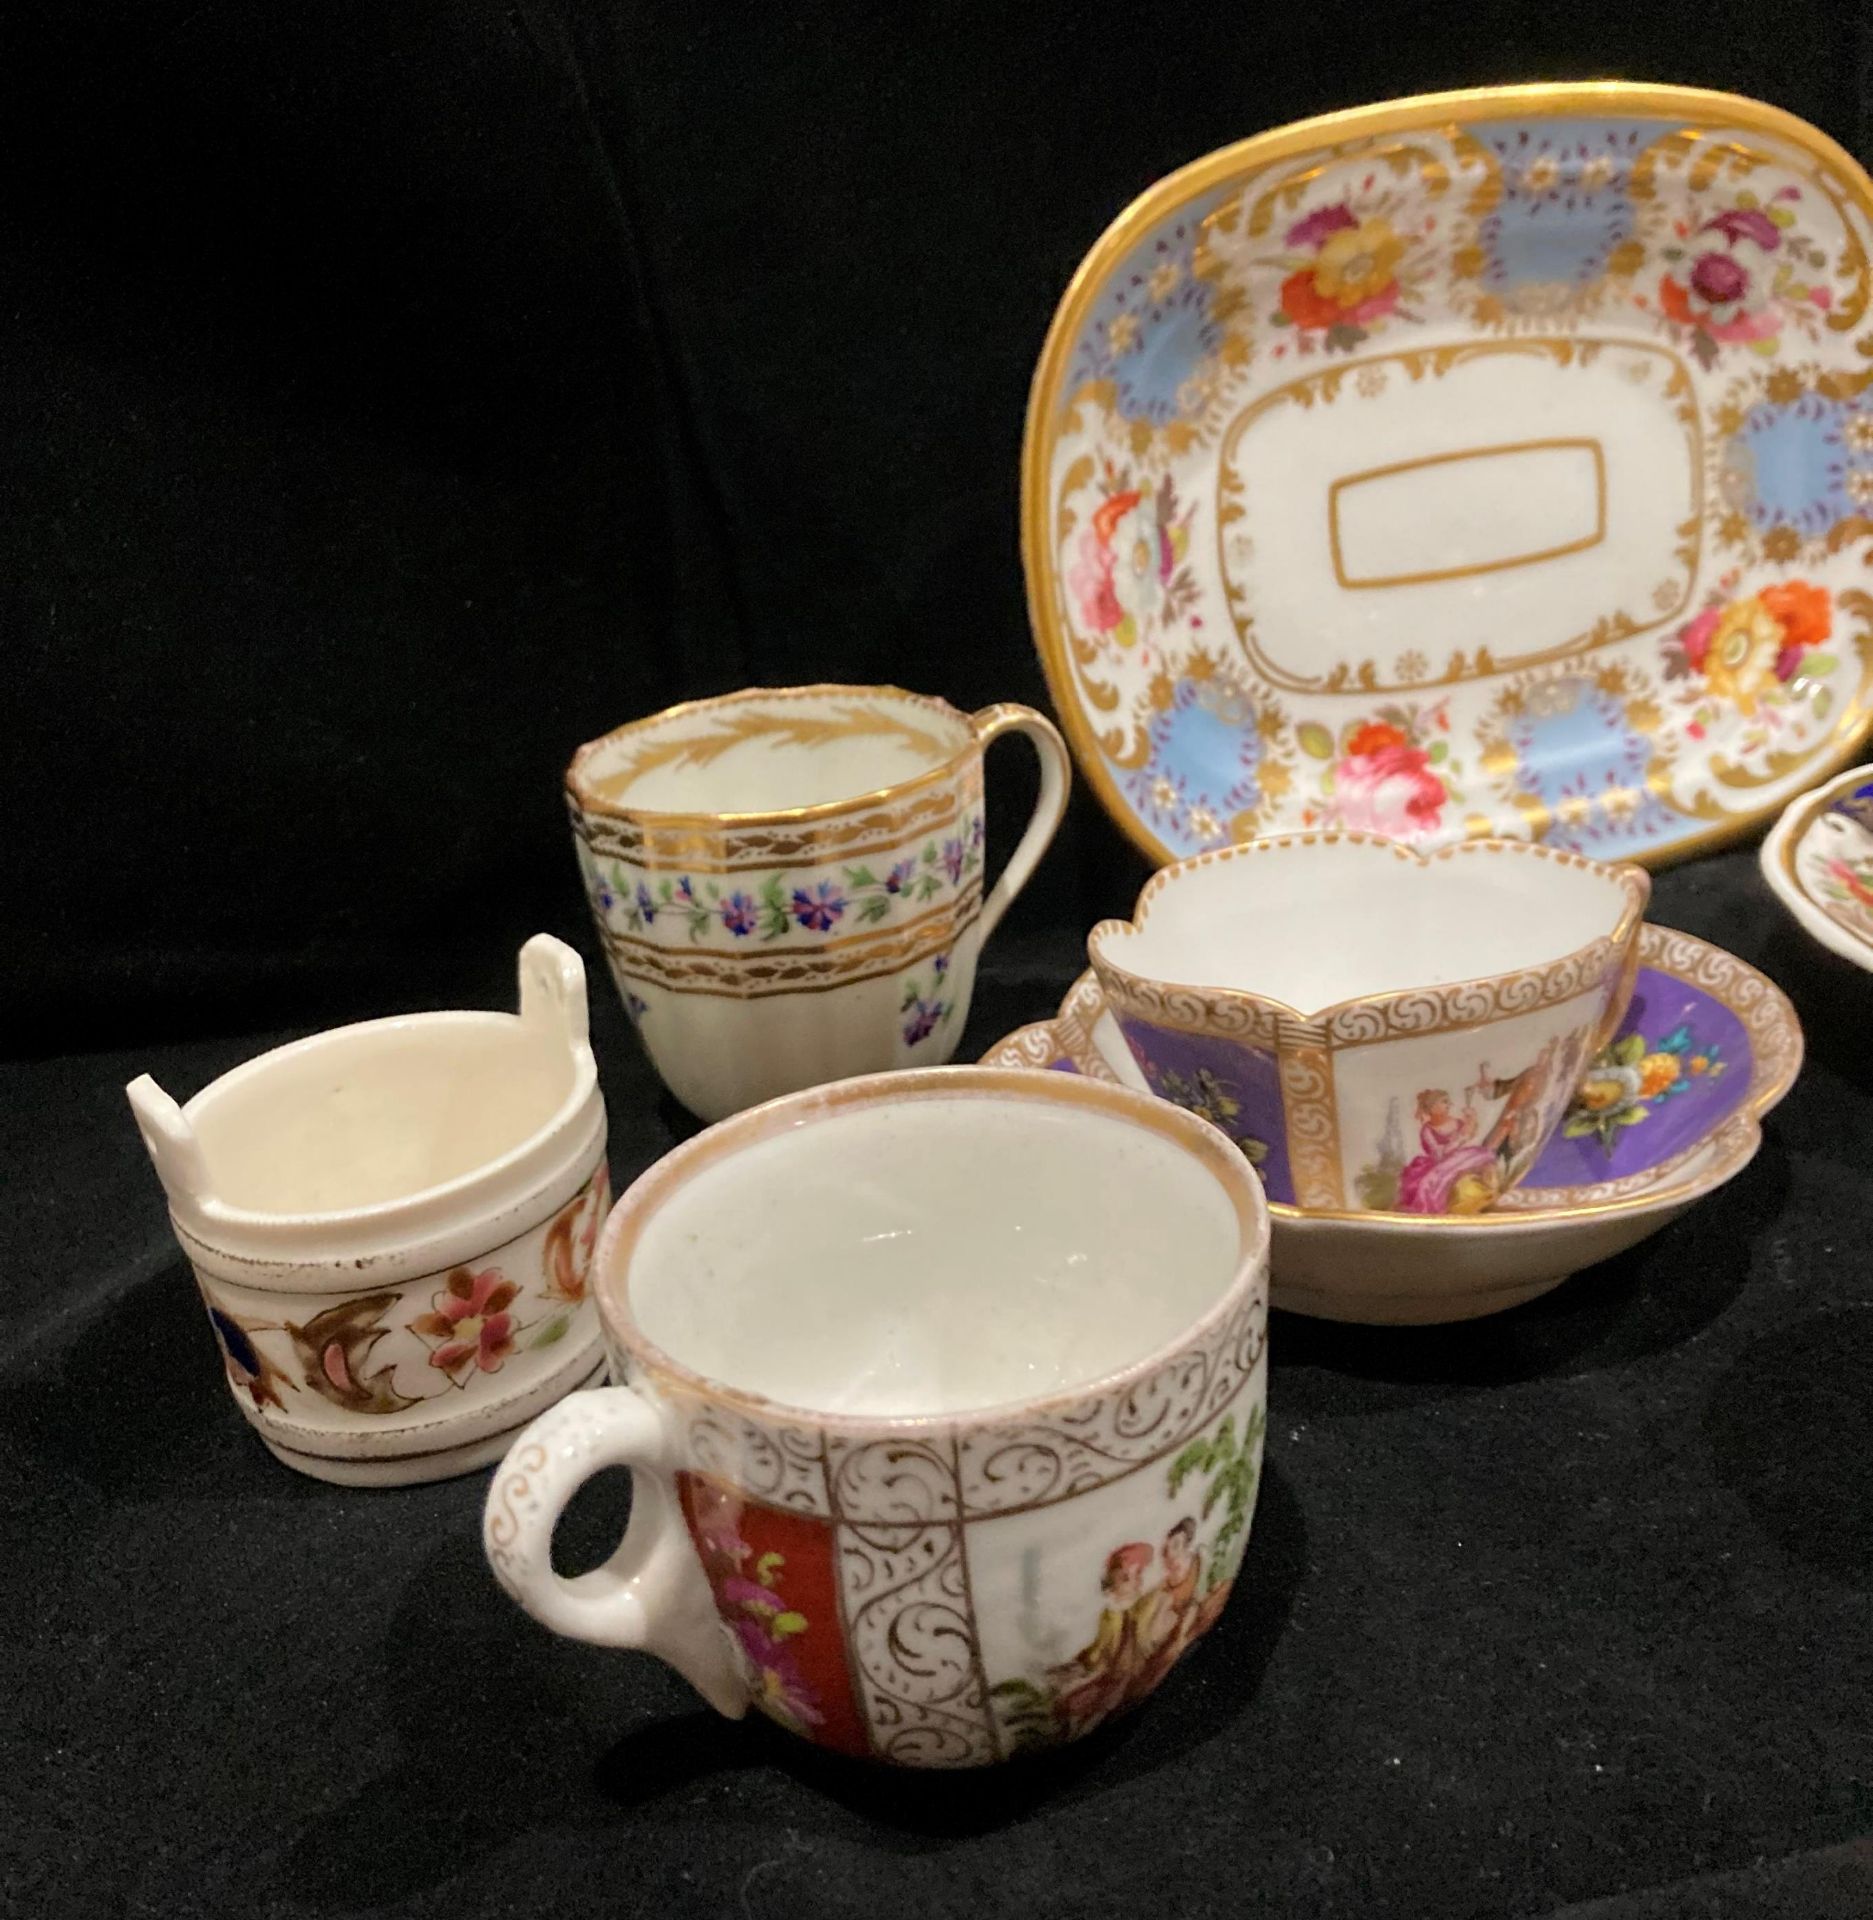 Contents to tray - ten items - Dresden cup and saucer, blue patterned cup and saucer, tray, cups, - Image 2 of 3